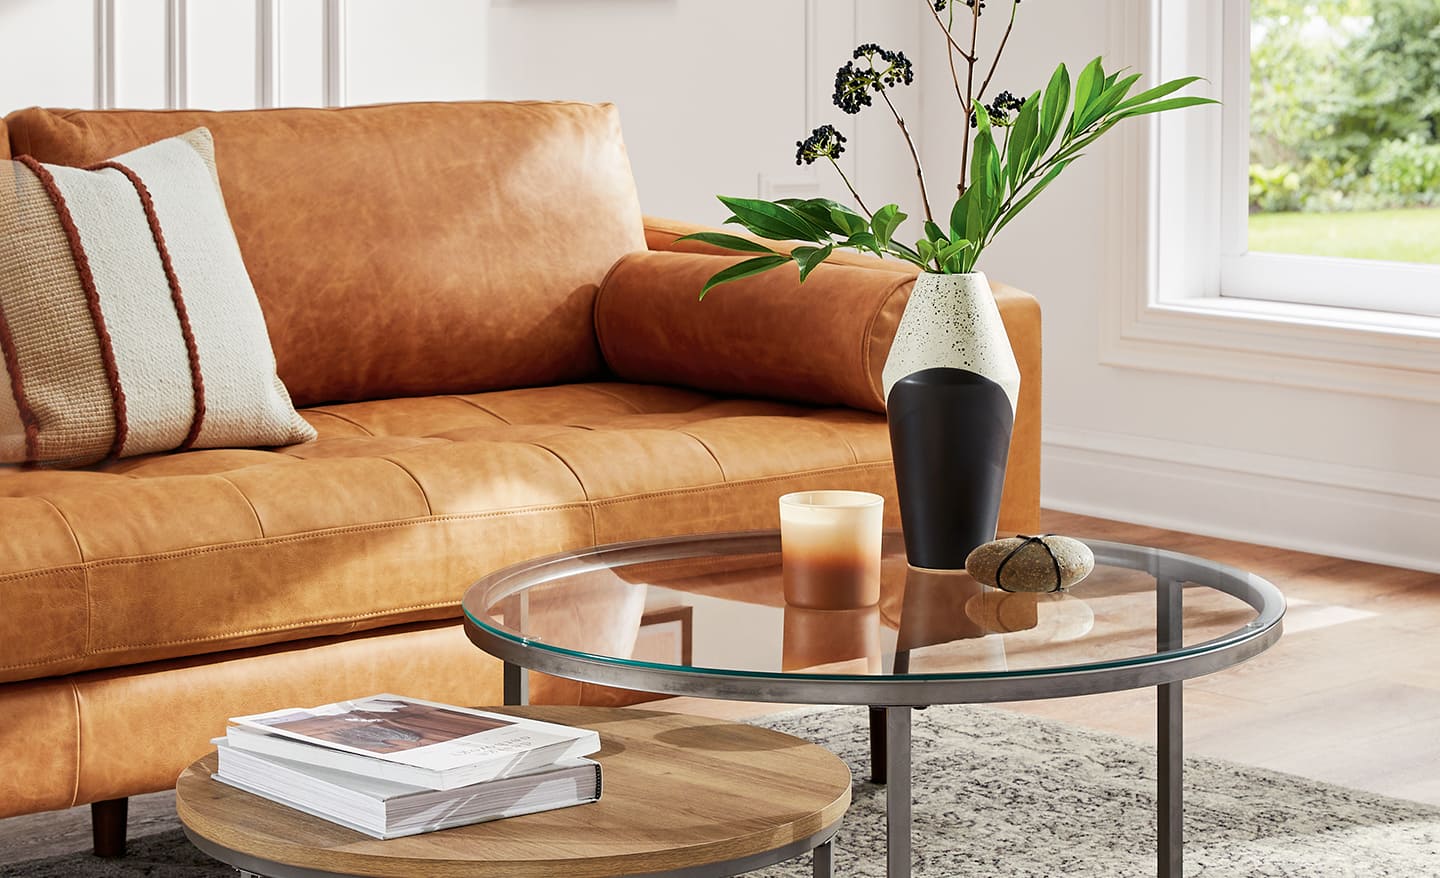 Glass coffee table with objects in a living room